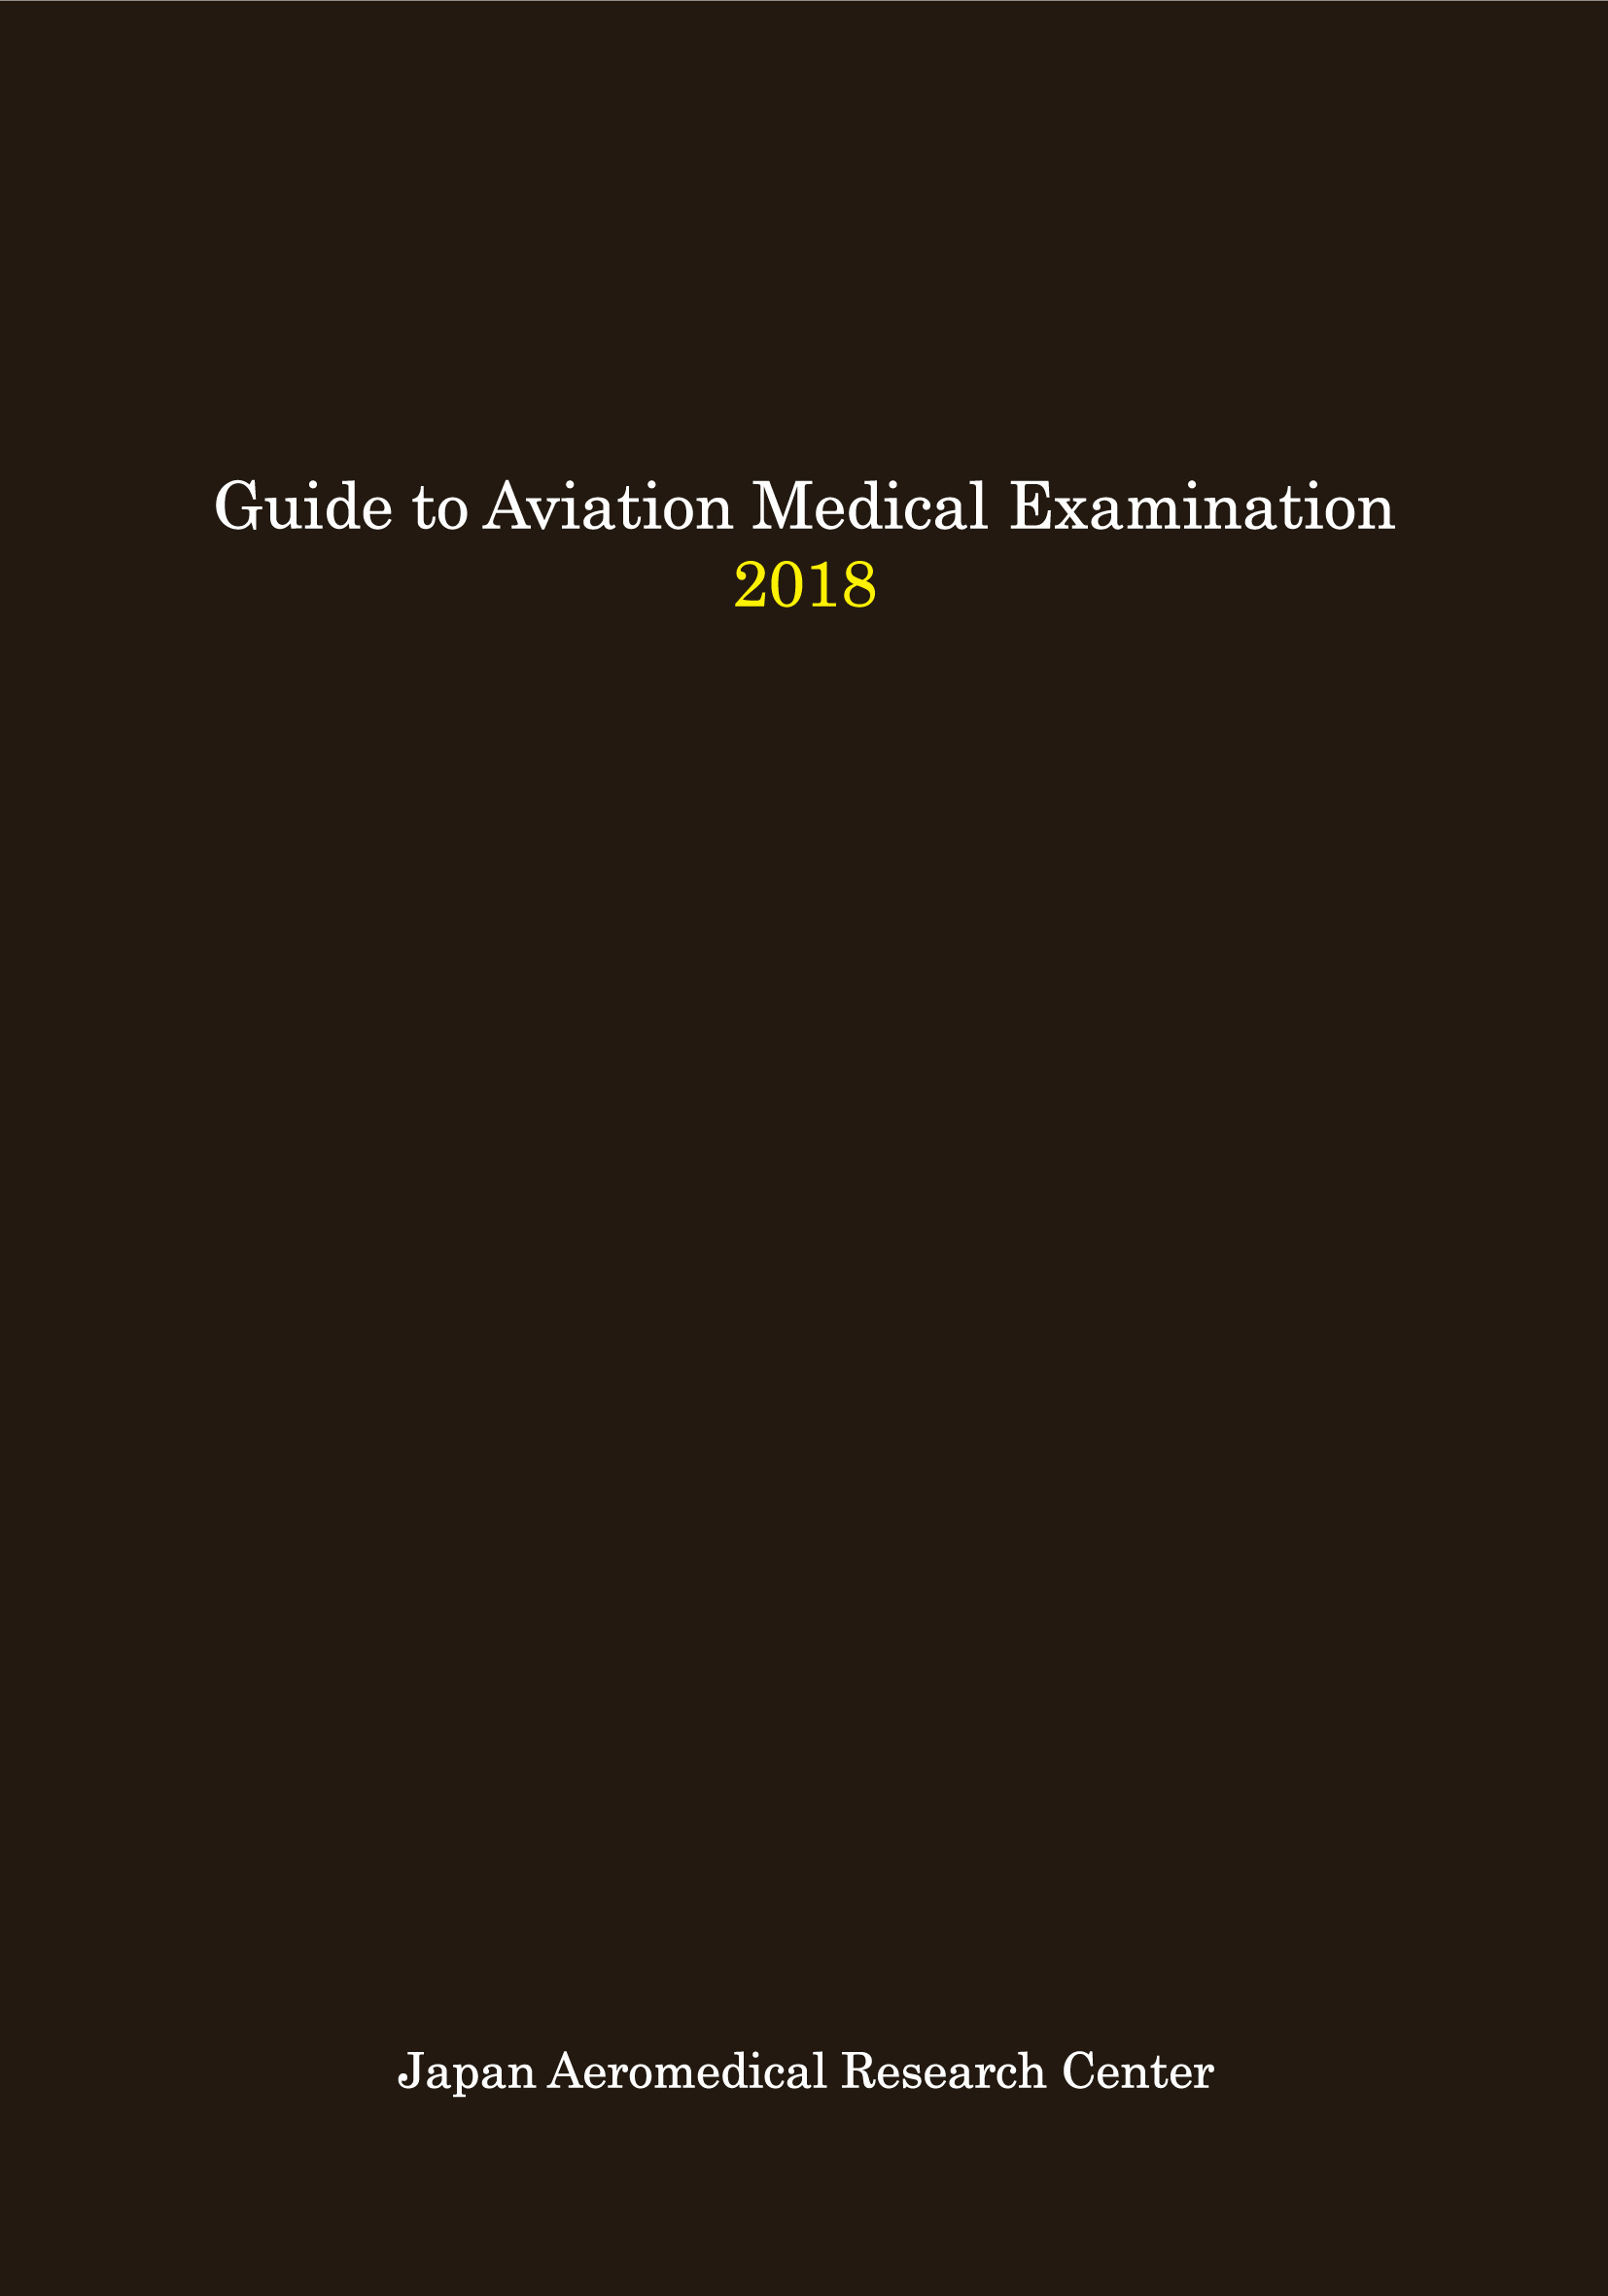 Guide to Aviation Medical Examination 2018